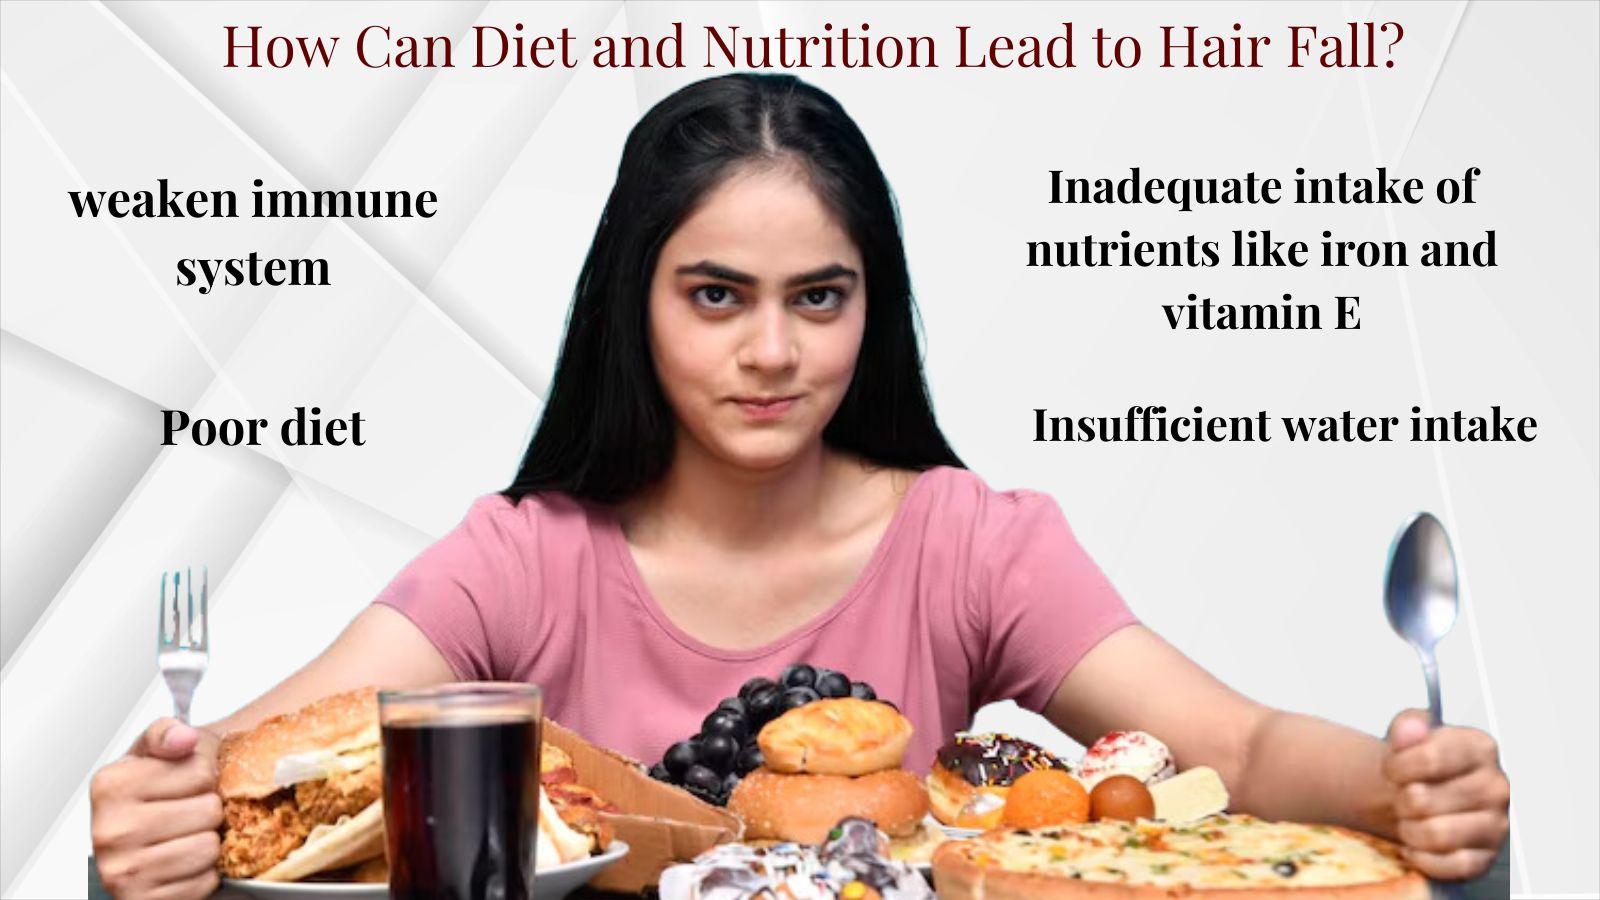 How Can Diet and Nutrition Lead to Hair Fall?